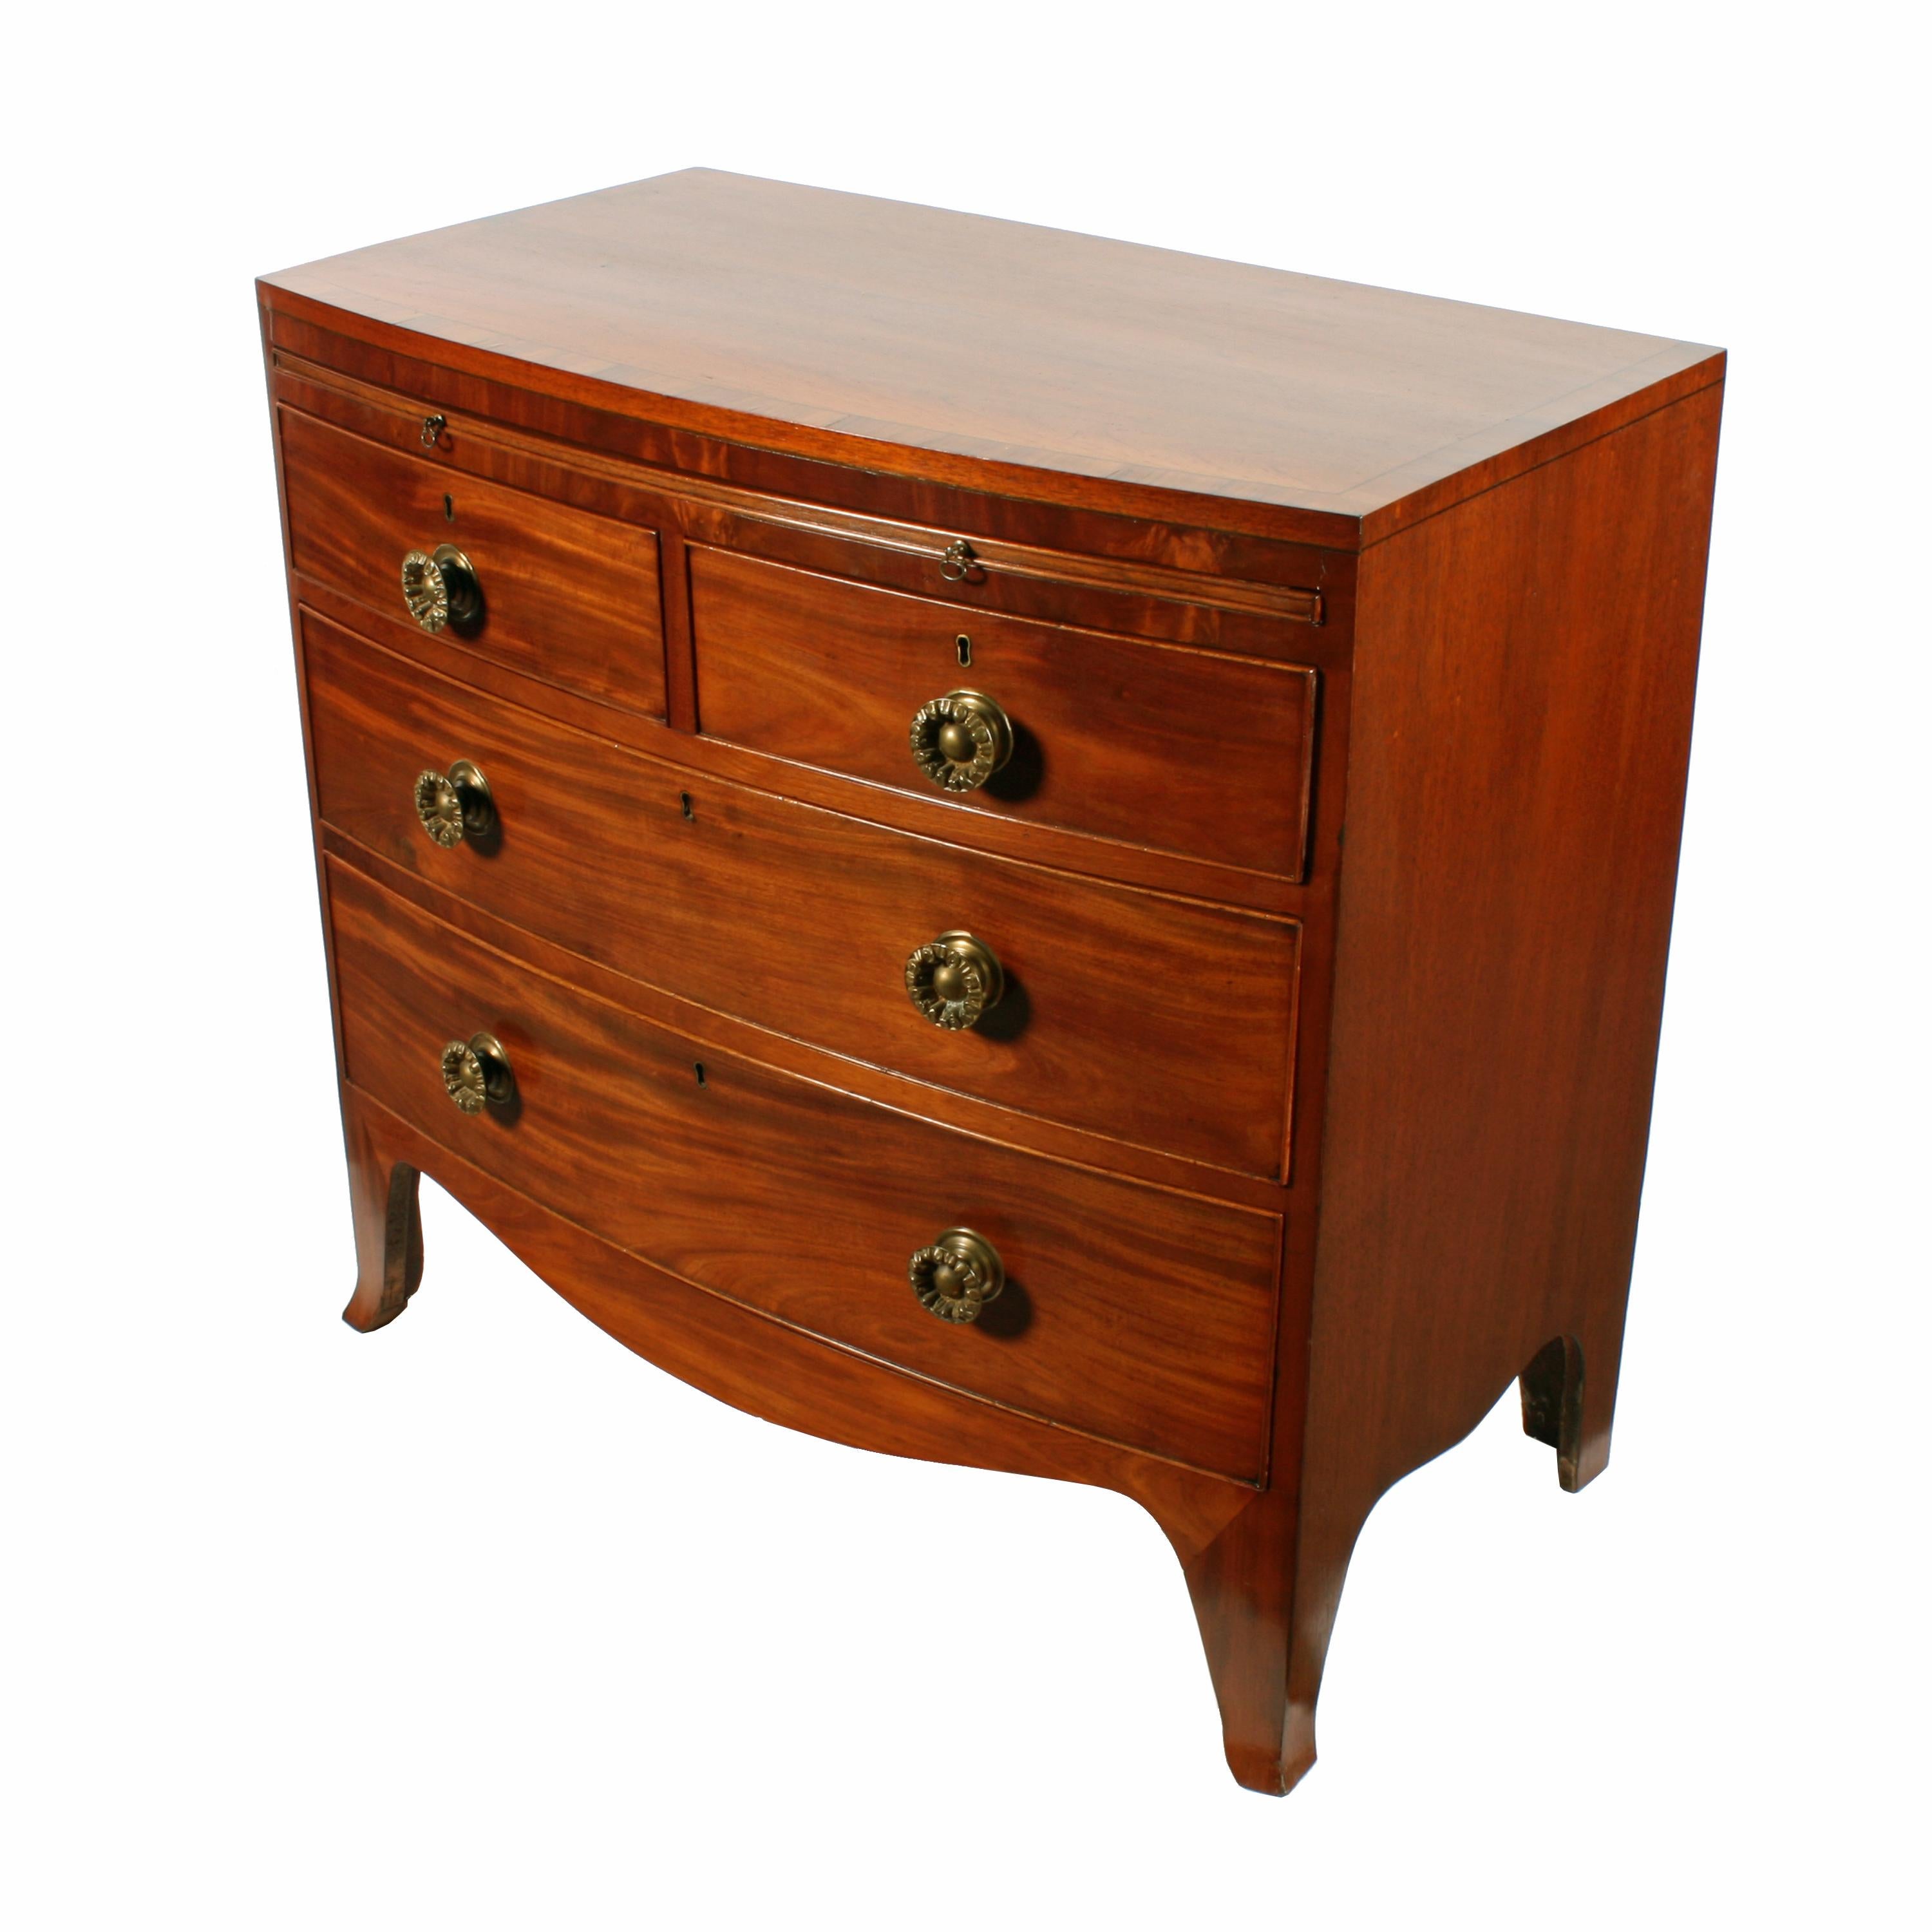 A small early 19th century Regency mahogany bow fronted four drawer chest.

The chest top has a broad rosewood crossbanded and ebony line inlaid edge.

The four drawers have a cock beaded edge and original brass knob handles.

The chest has a